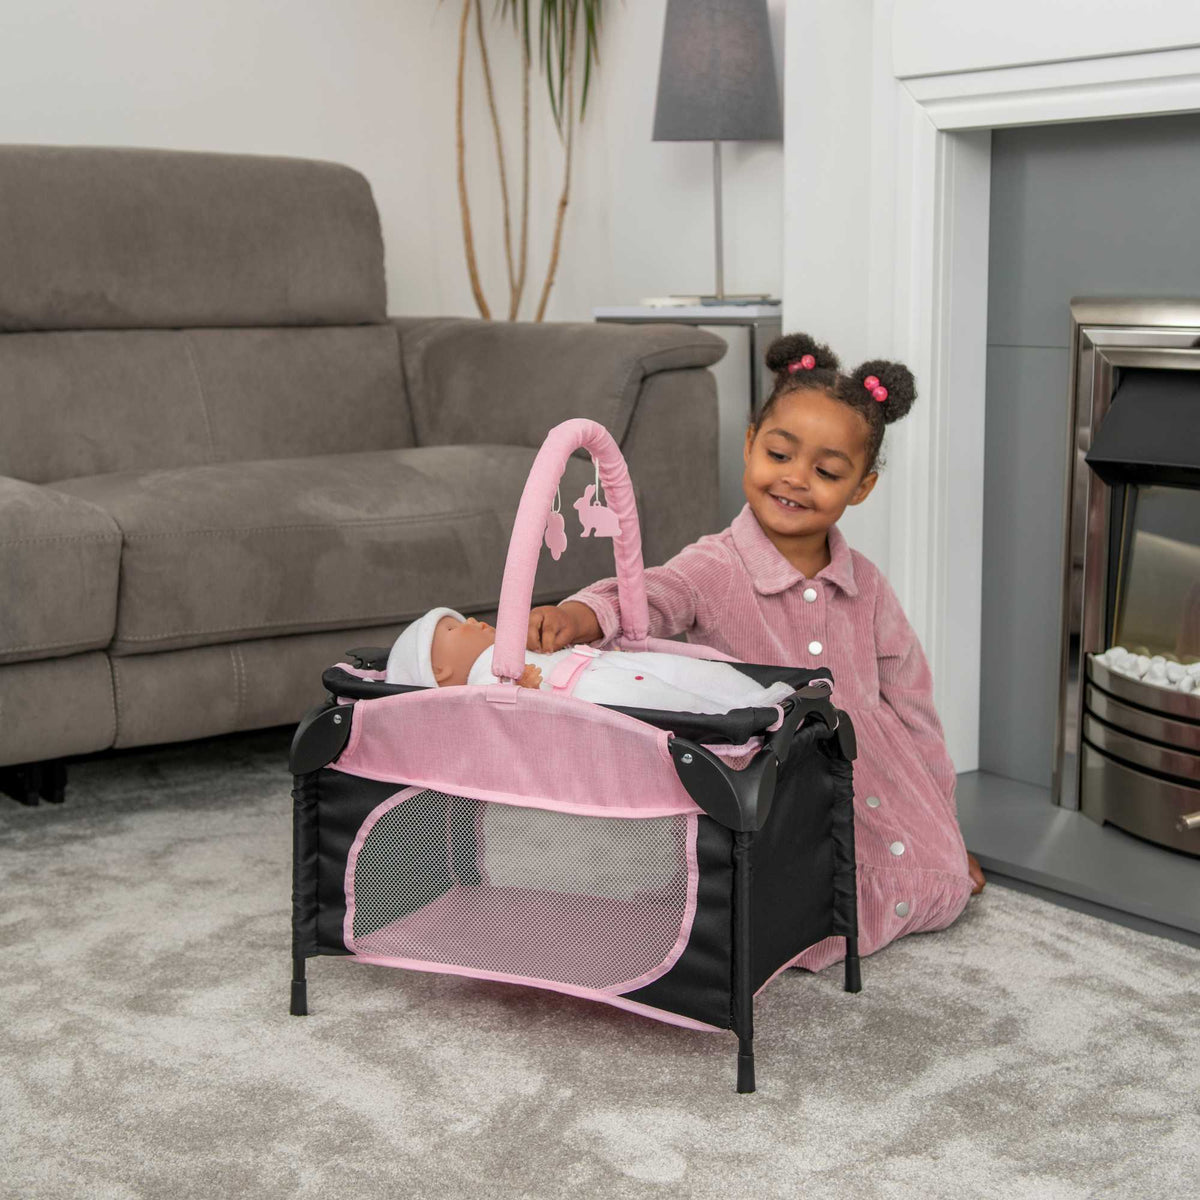 Joie Sleep &amp; Dream Dolls Travel Cot, a compact and foldable design in pink and grey, featuring breathable mesh sides and a sturdy frame, ideal for children to use for their dolls during playtime and travel